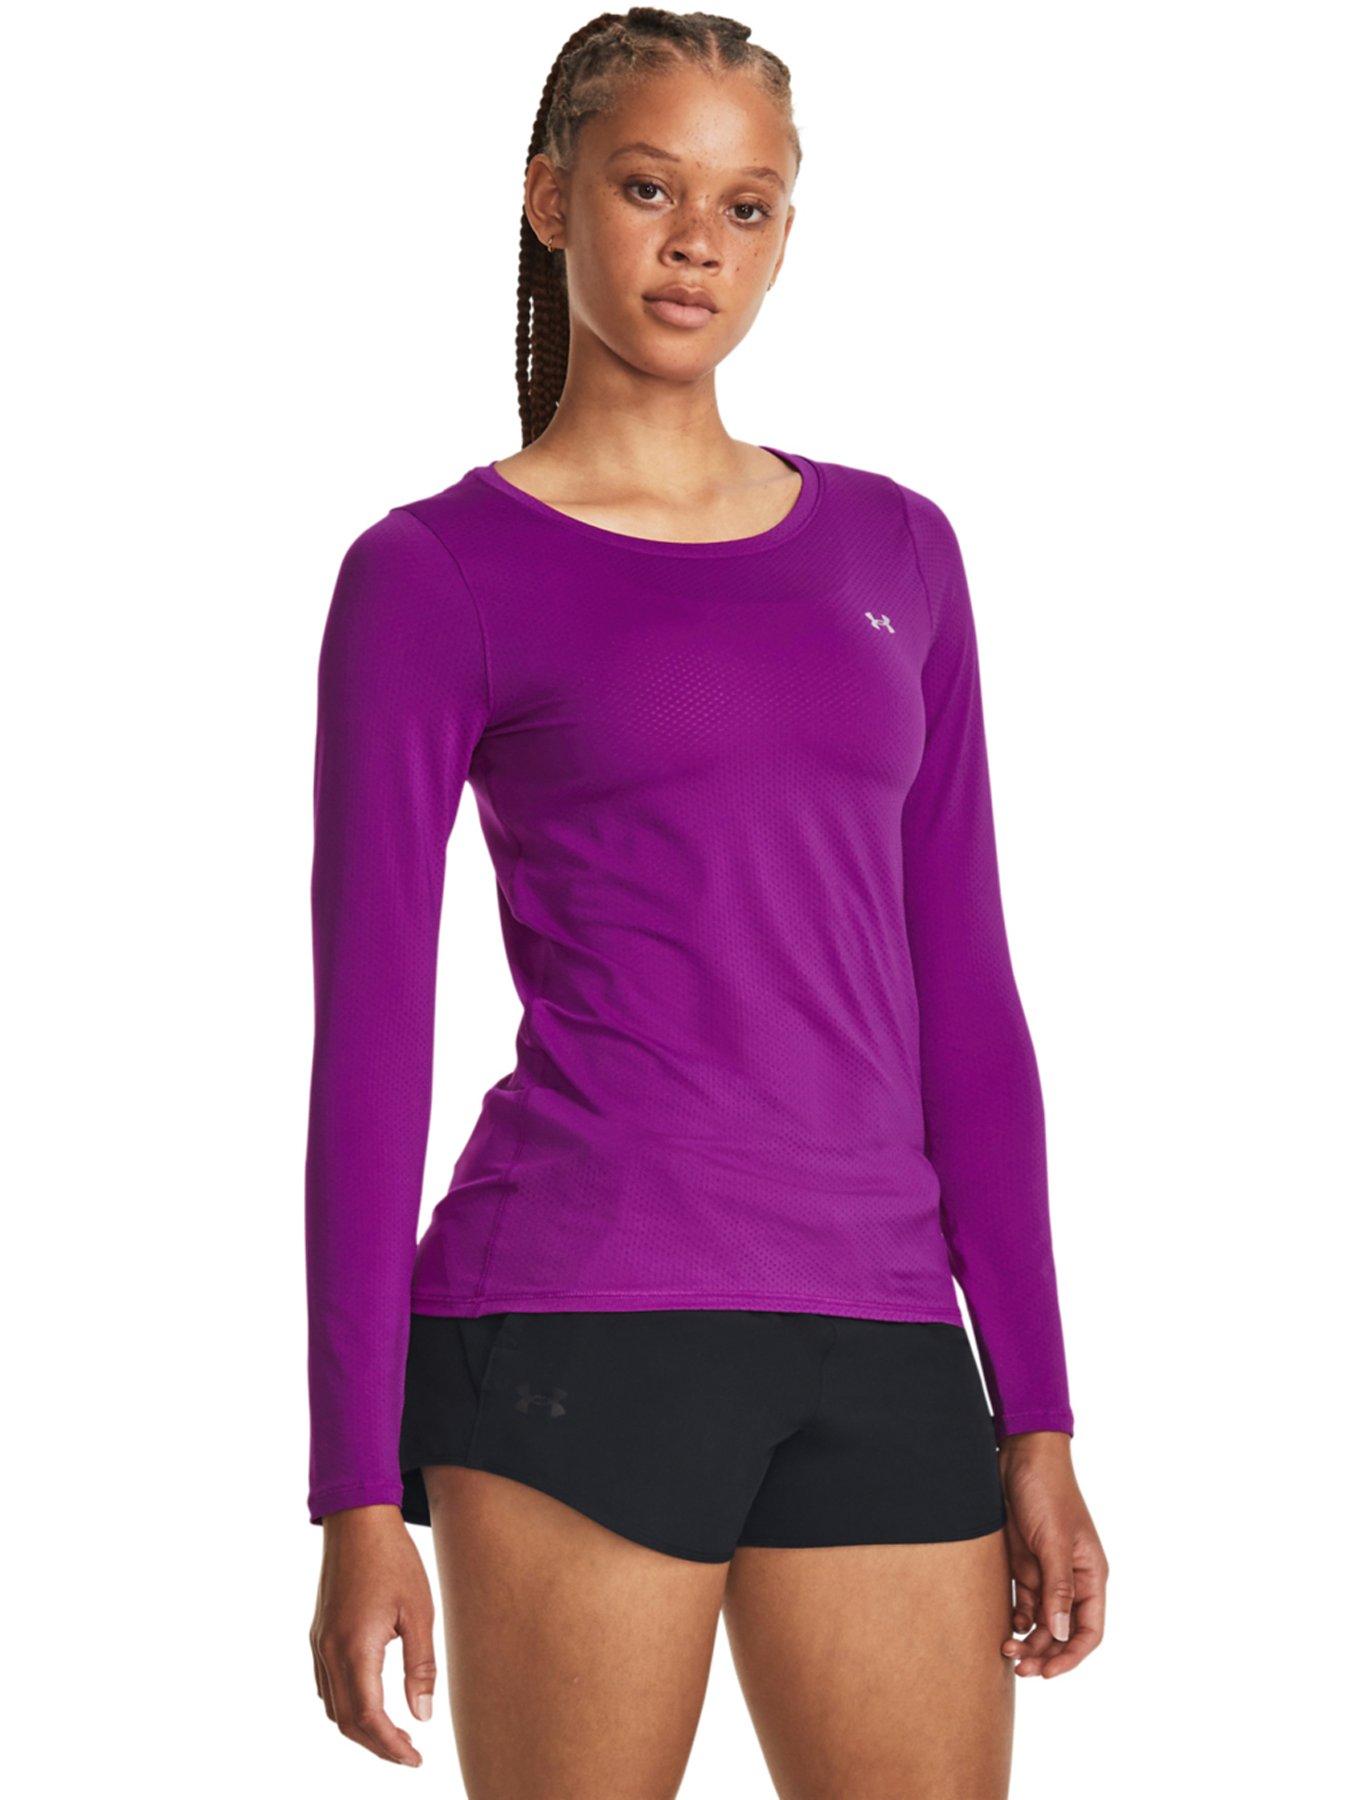 30% - 50%, 4, All Black Friday Deals, Purple, Under armour, T-shirts, Womens sports clothing, Sports & leisure